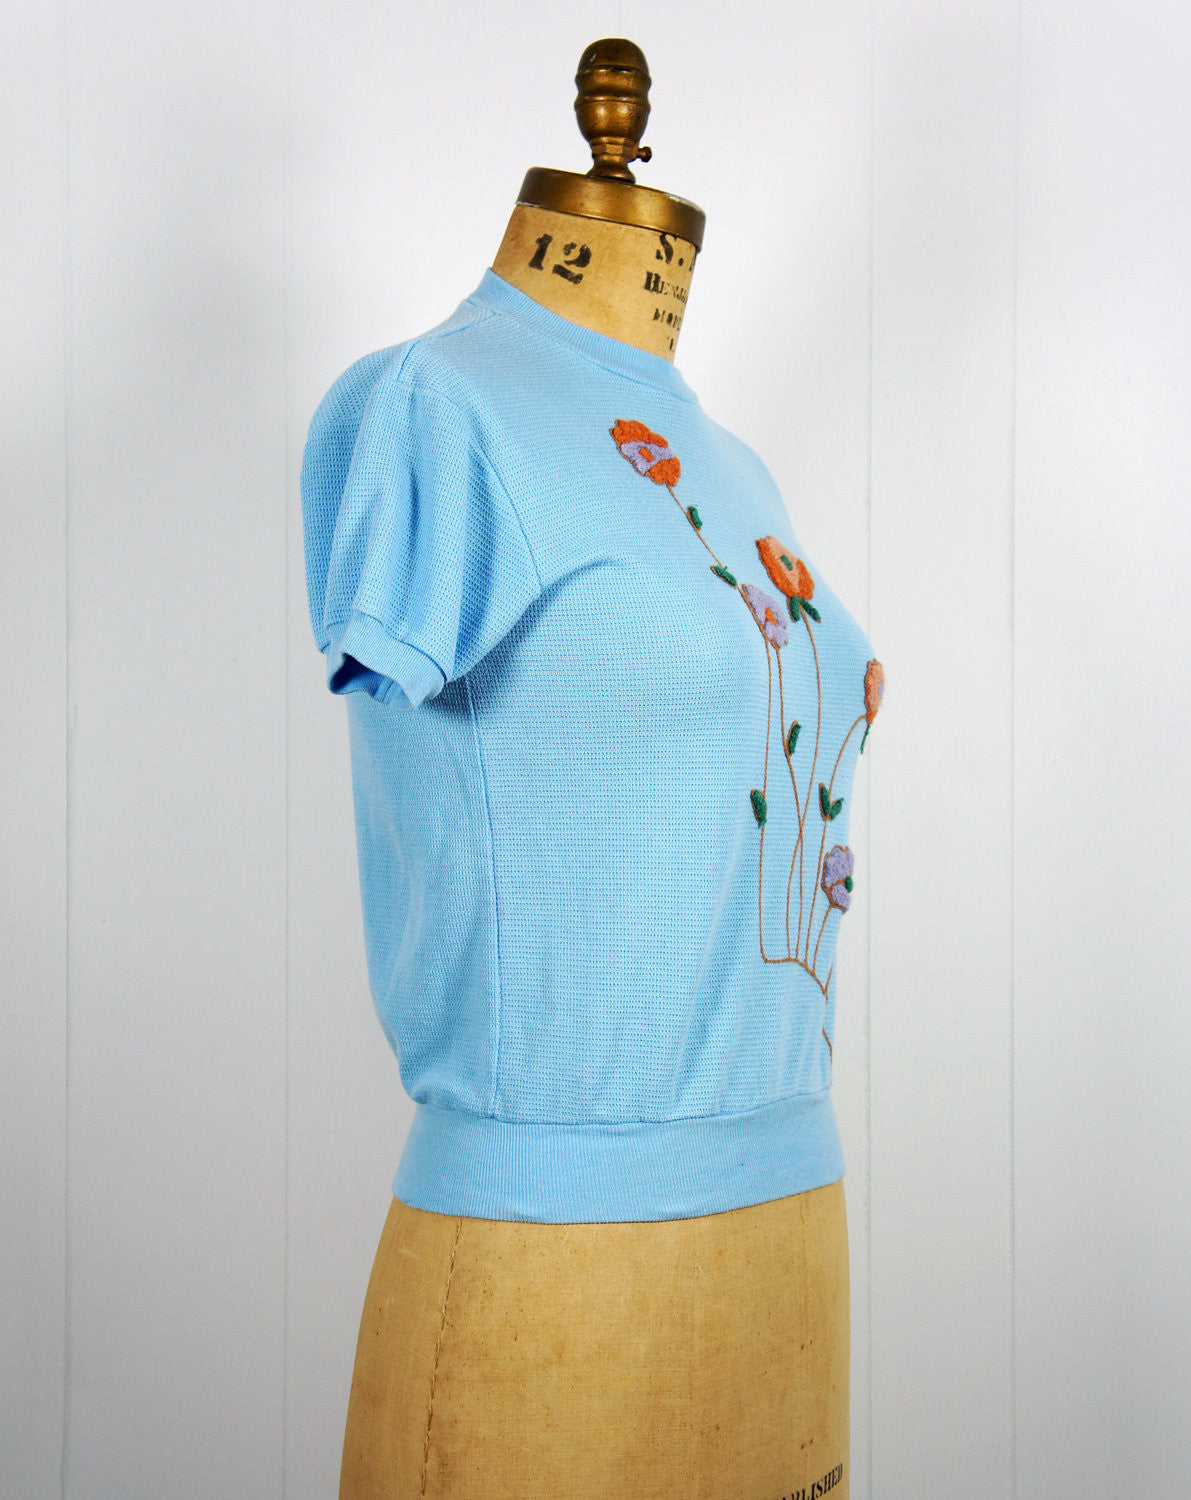 1970's Light Blue Thermal Top w/ Floral Embellishments - Size S